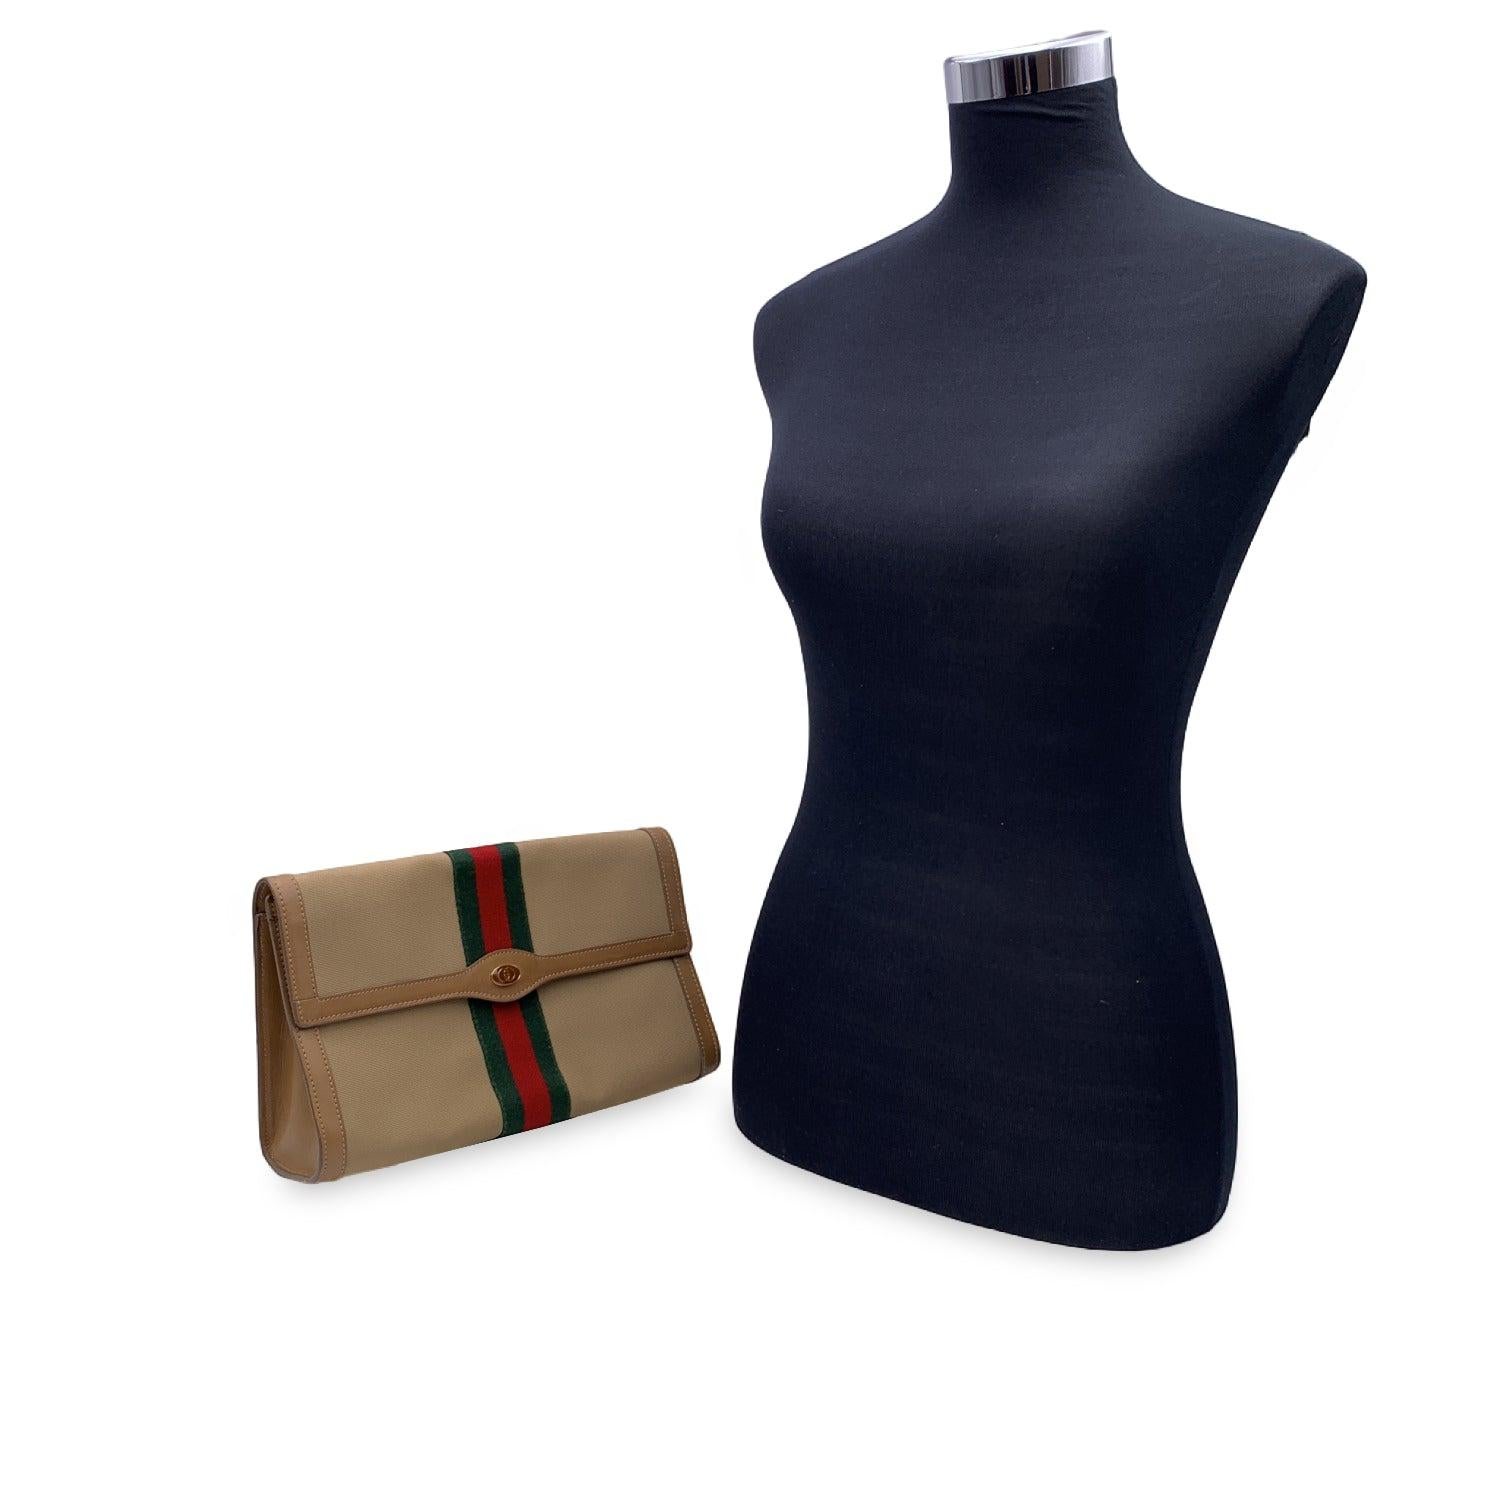 Gucci Vintage flap cosmetic bag with stripes. Beige canvas with genuine leather trim. Green/Red/Green stripes around the bag. GG - GUCCI logo on the front. Flap with button closure on the front. Beige lining. 'GUCCI Parfums- Made in Italy' tag